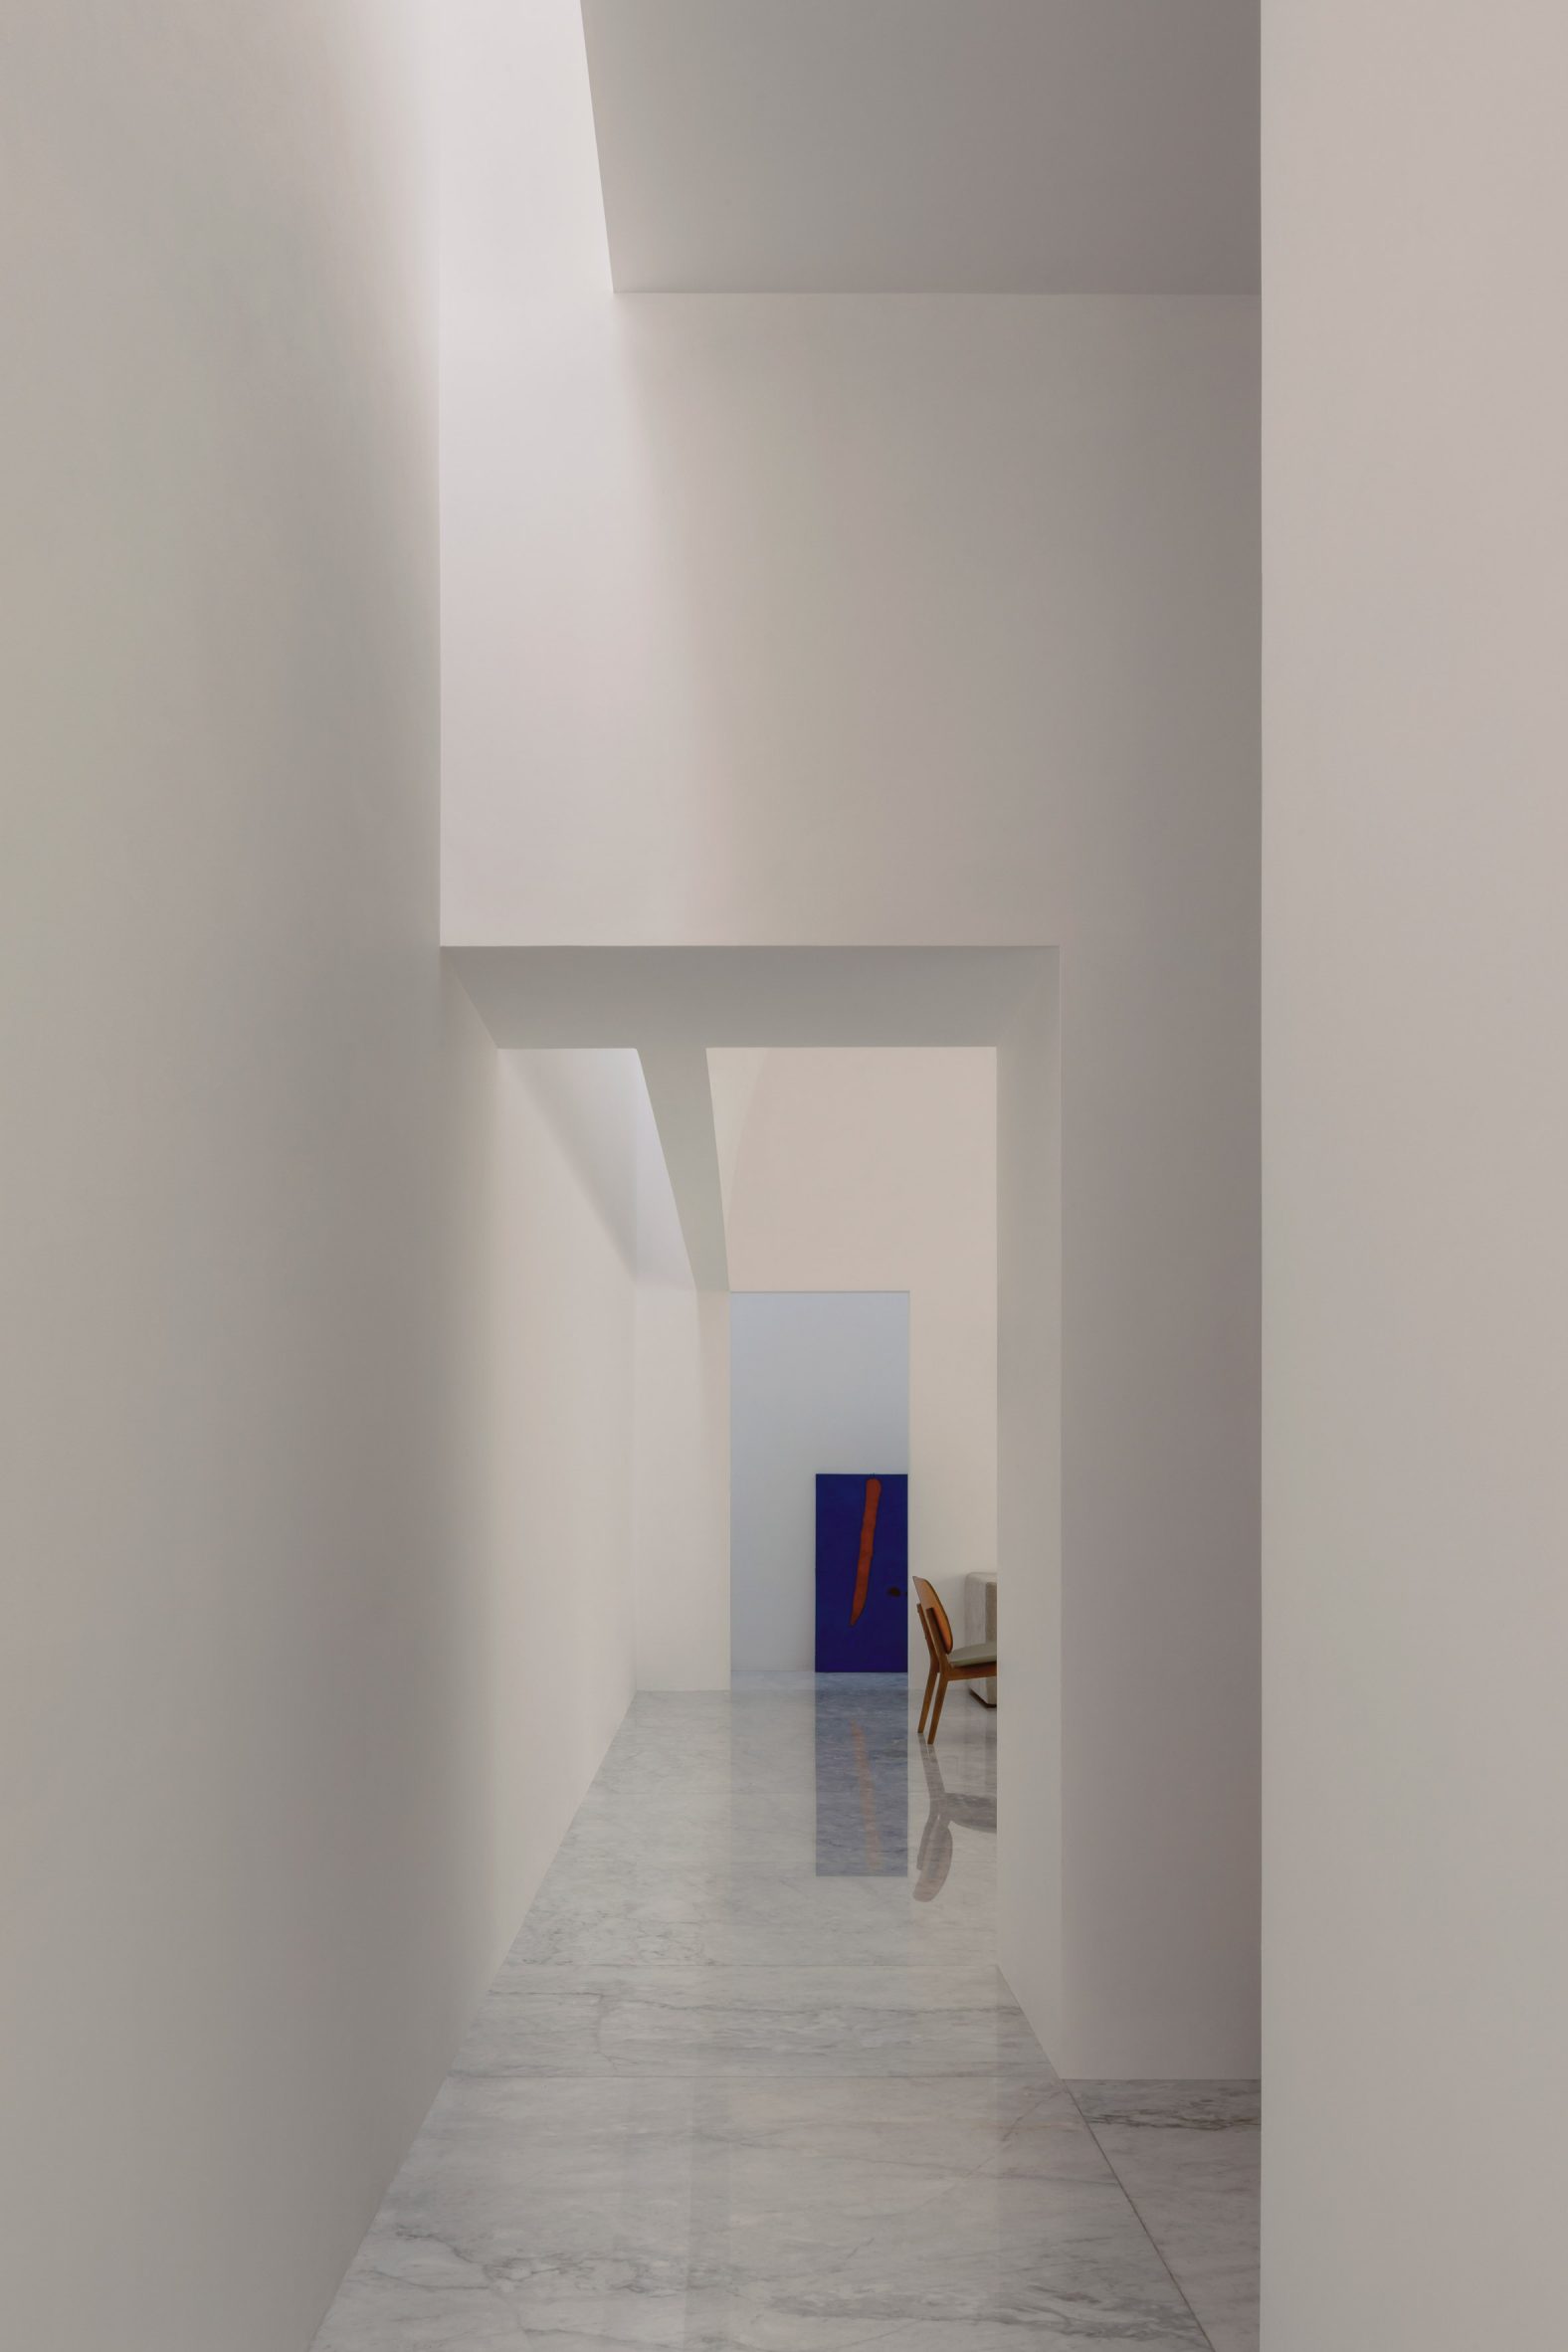 A white interior corridor with a rectangular opening leading to a living room with a blue painting